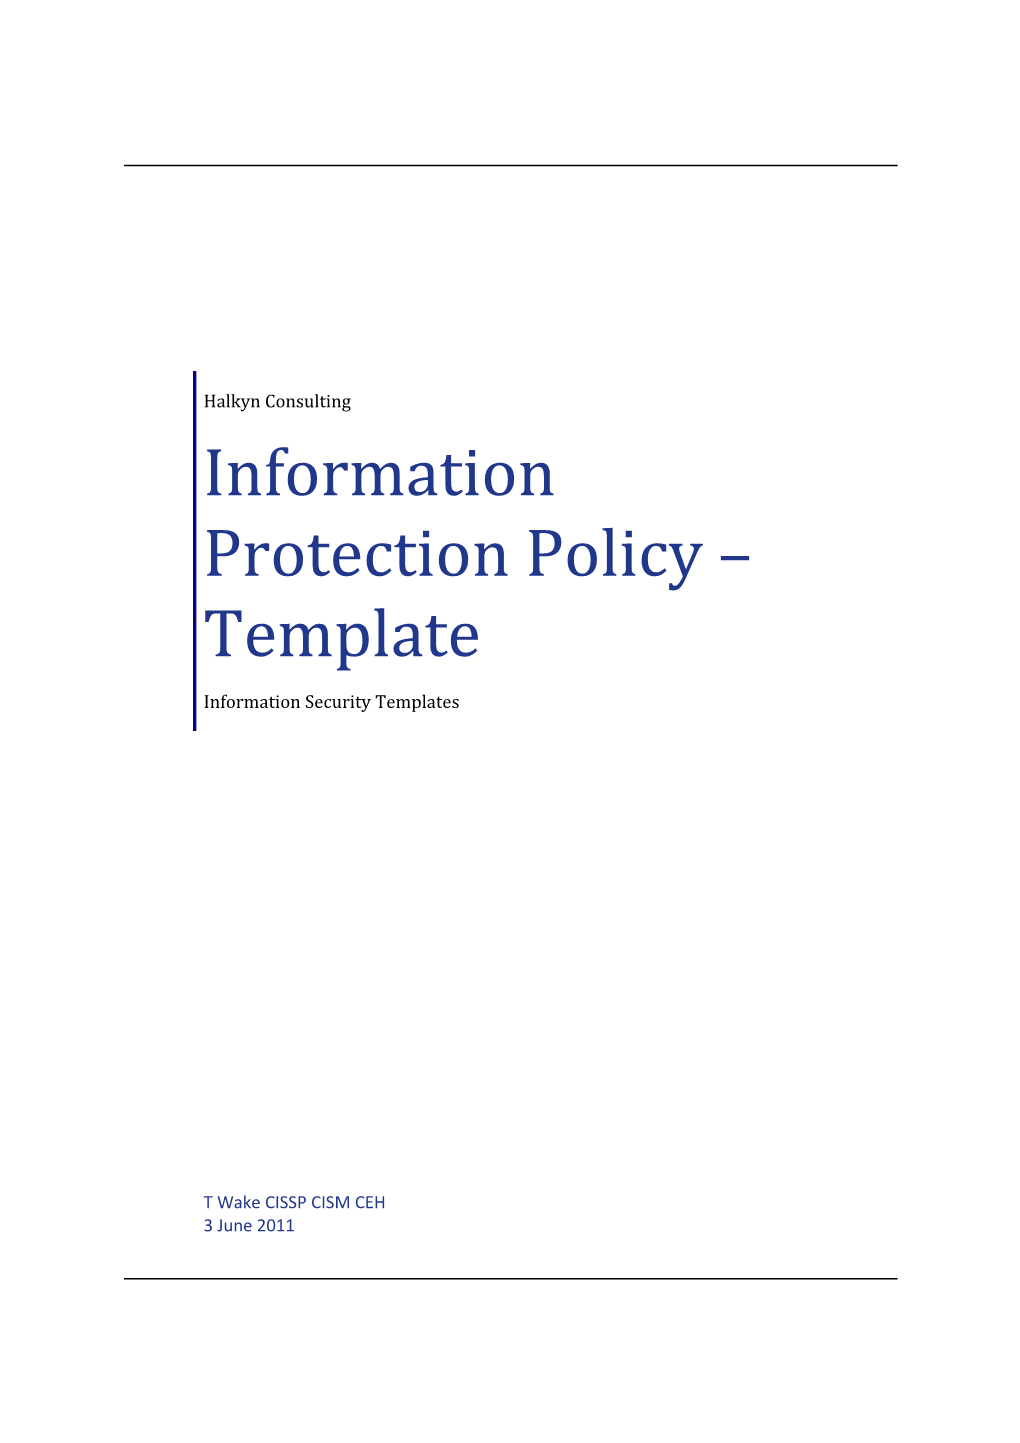 Information Protection Policy Template